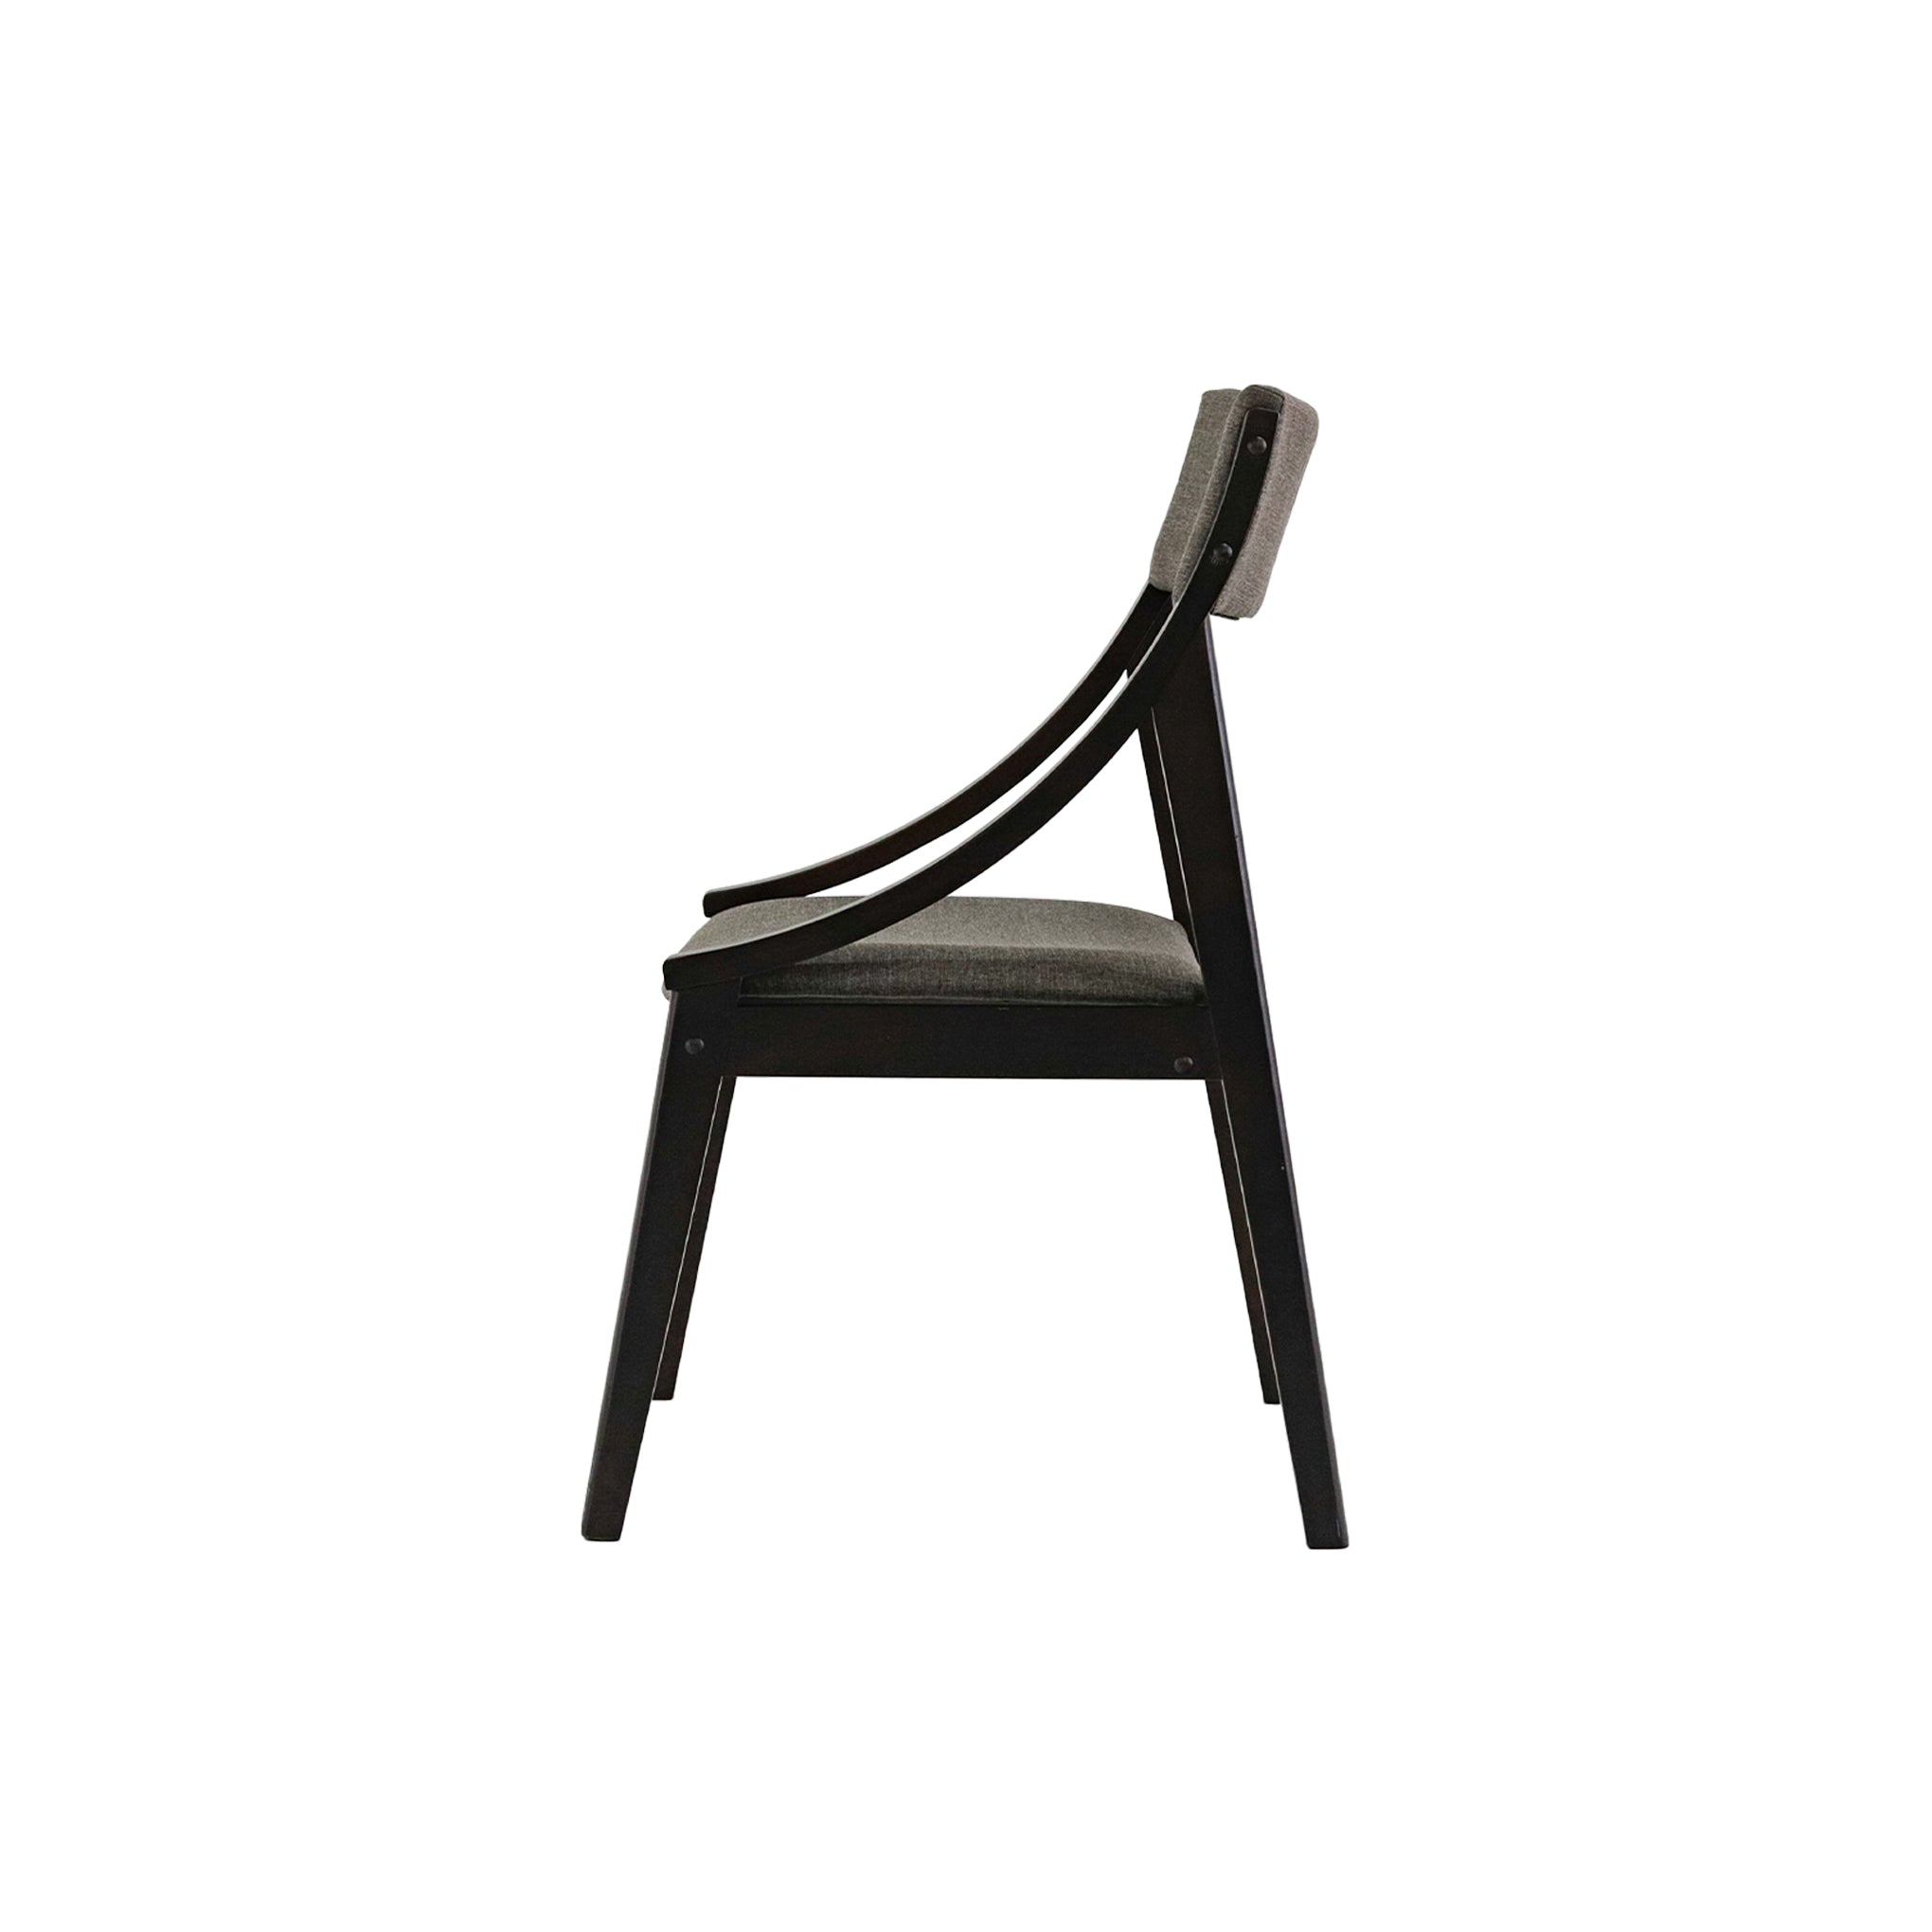 Dawenge Wooden Dining Chair with Cushion Seat